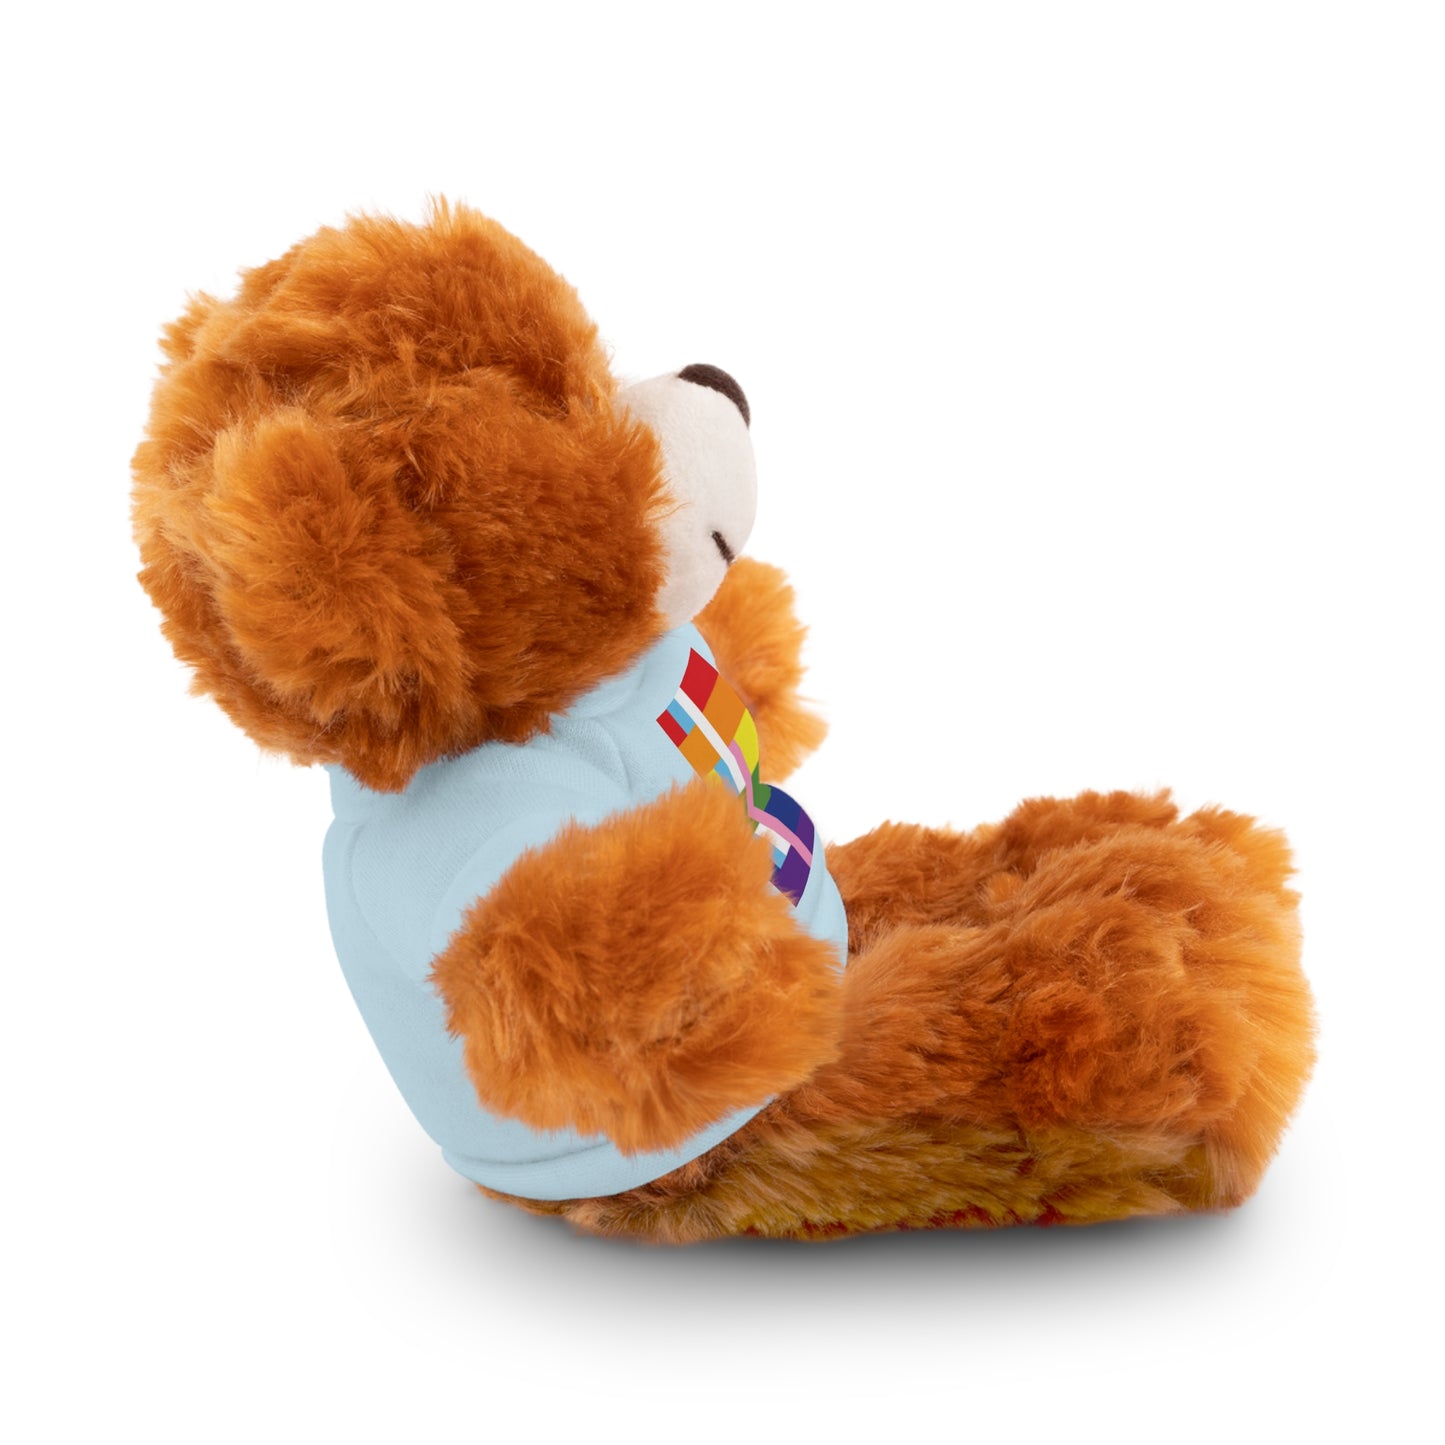 All in this together - Stuffed Animals with Tee